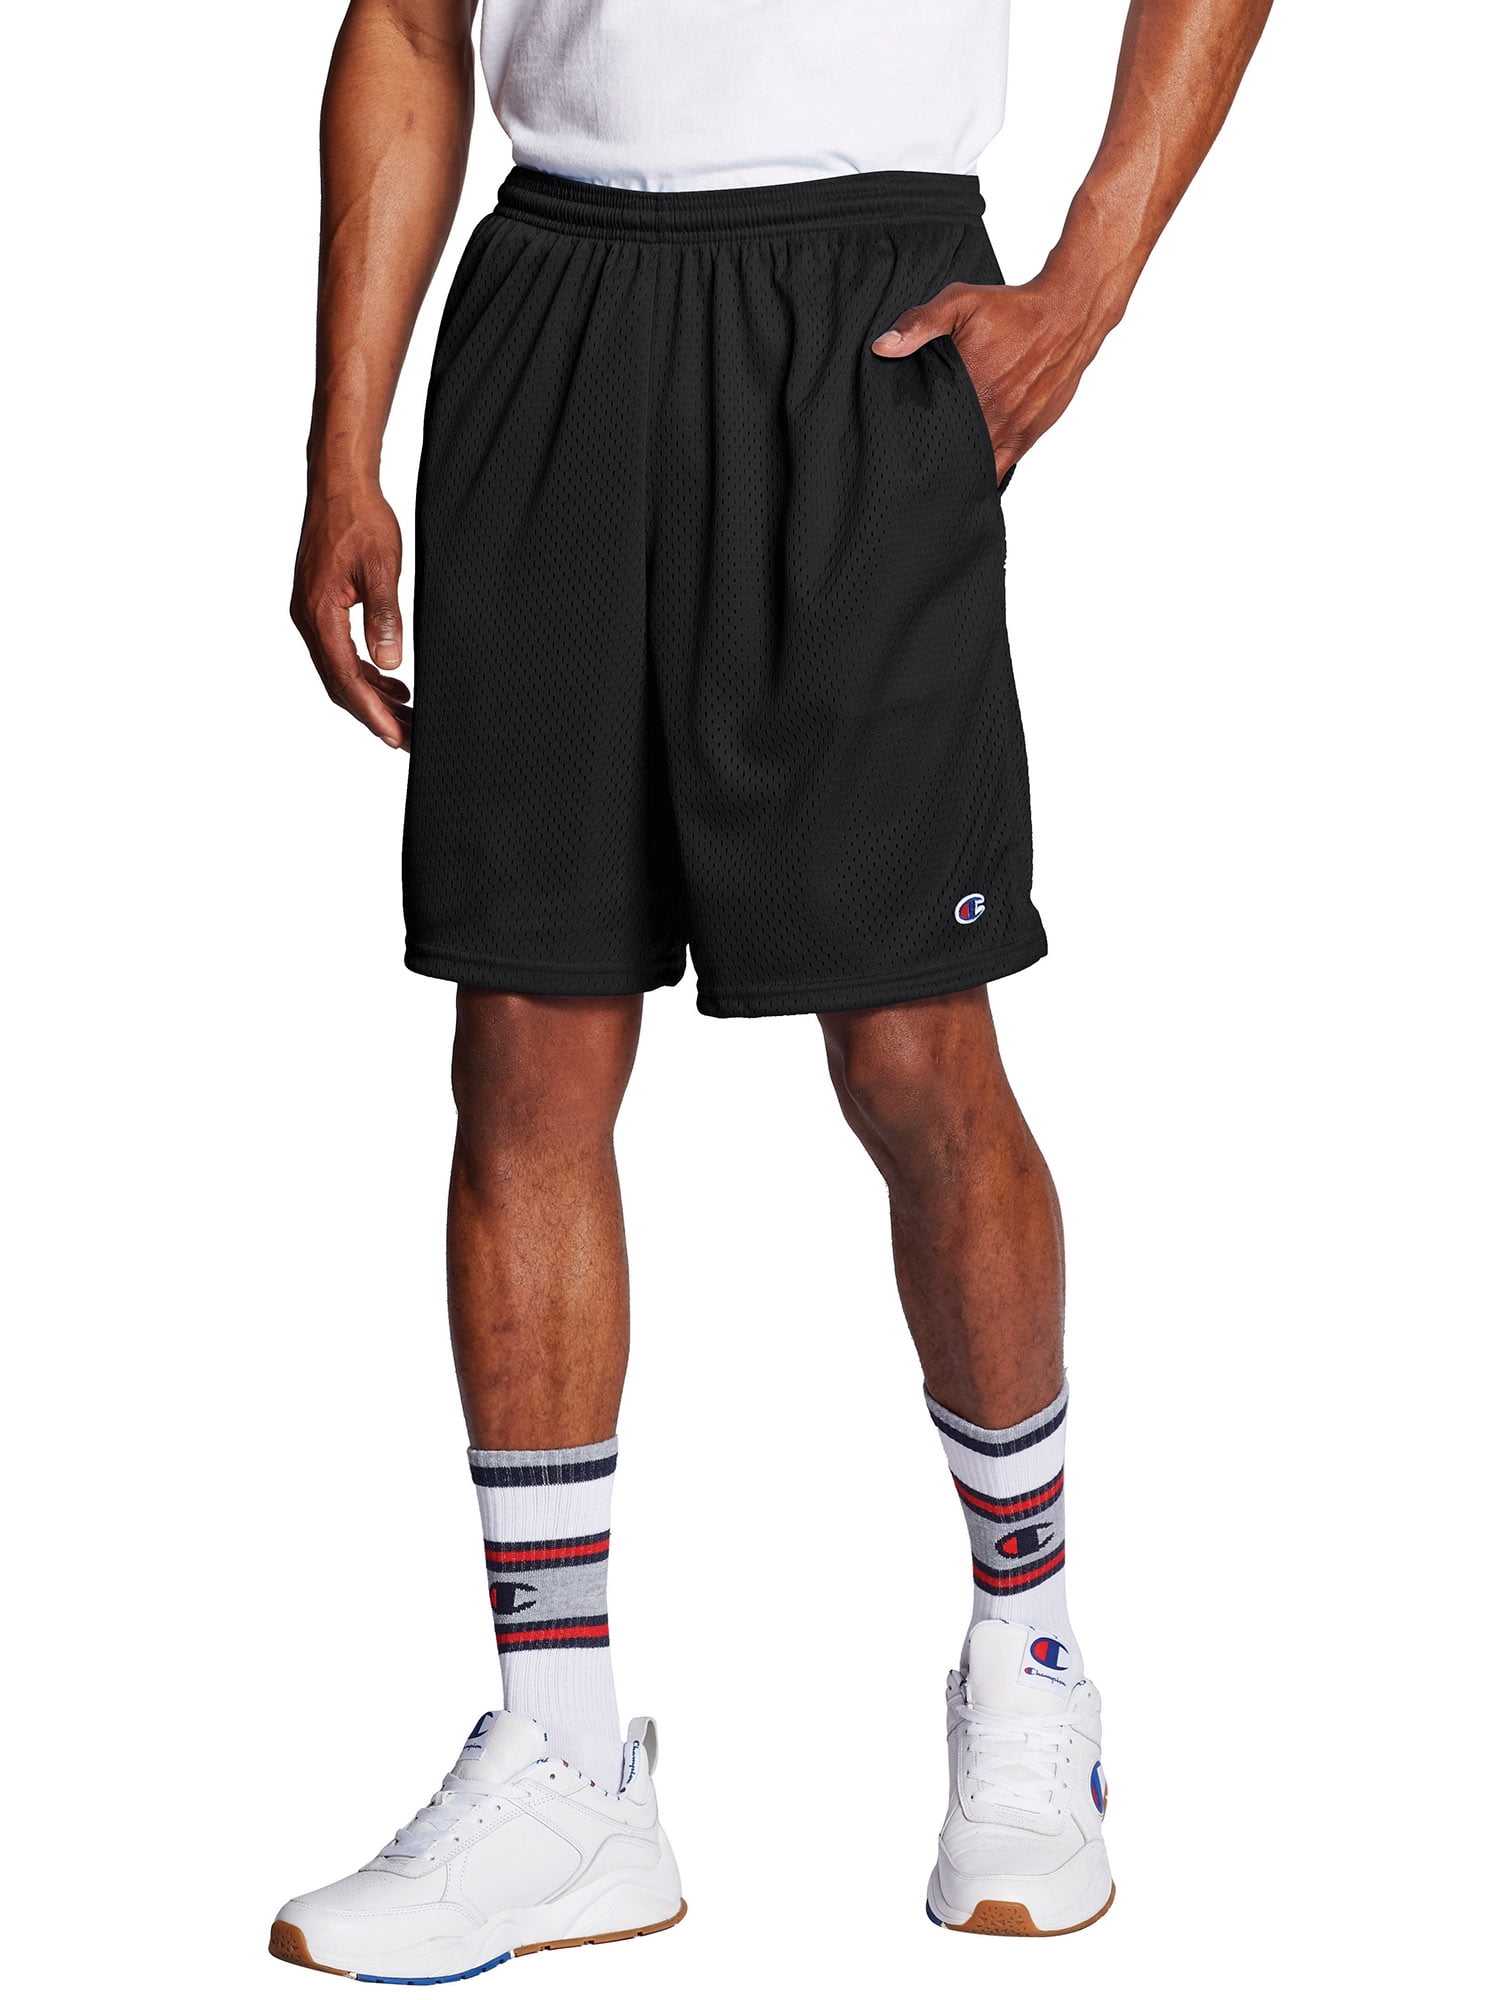 Champion Long Mesh 9" Shorts with Pockets, up to Size 4XL - Walmart.com